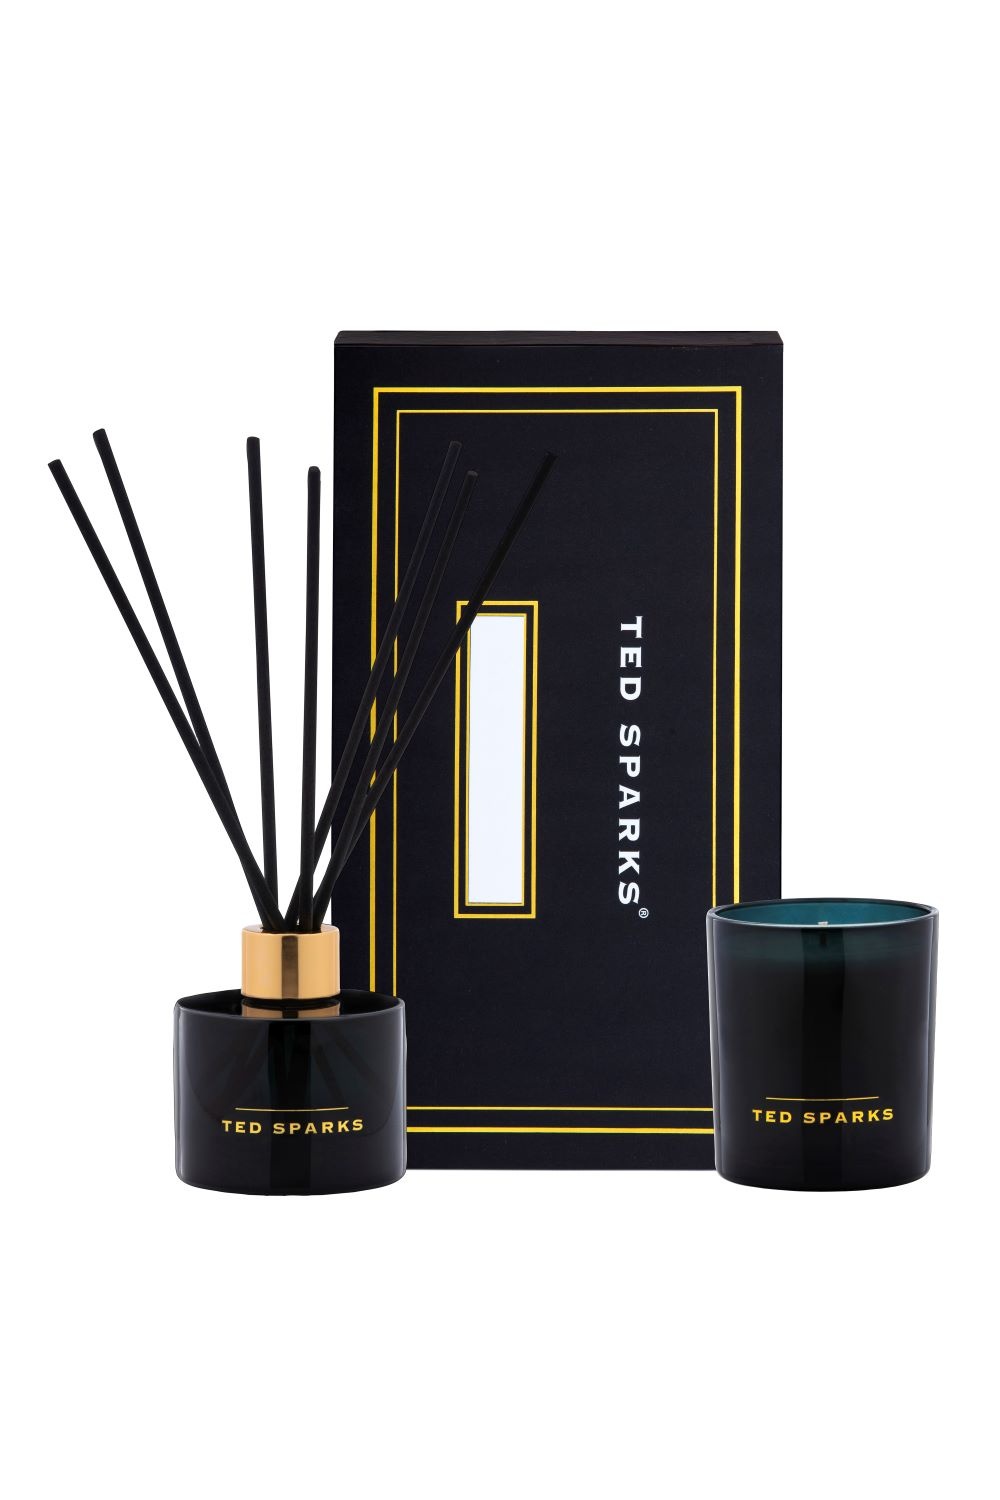 ted-sparks-candle-diffuser-gift-set-bamboo-peony